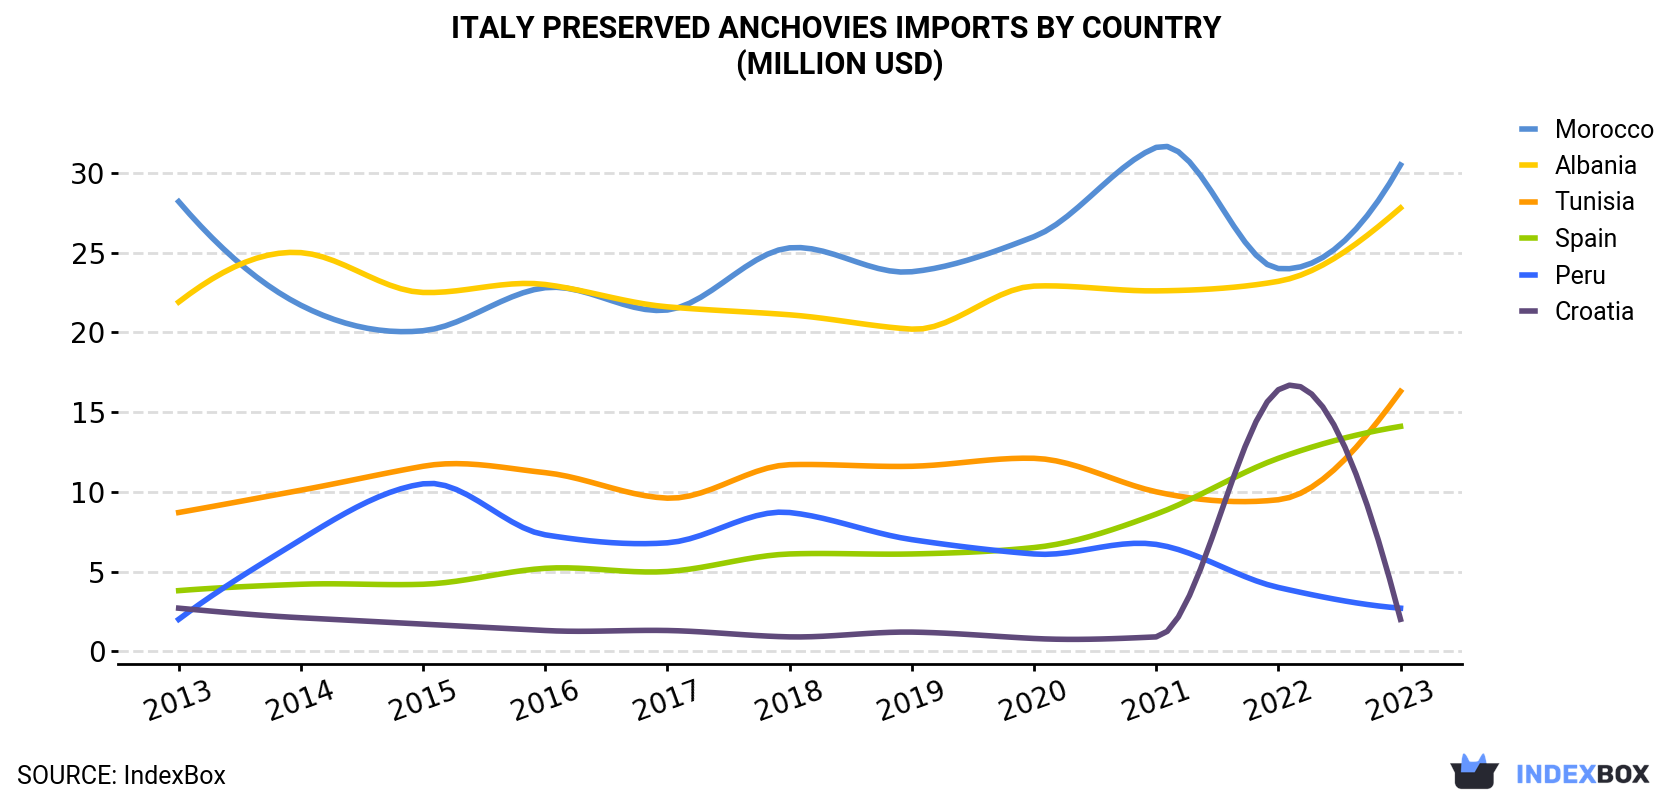 Italy Preserved Anchovies Imports By Country (Million USD)